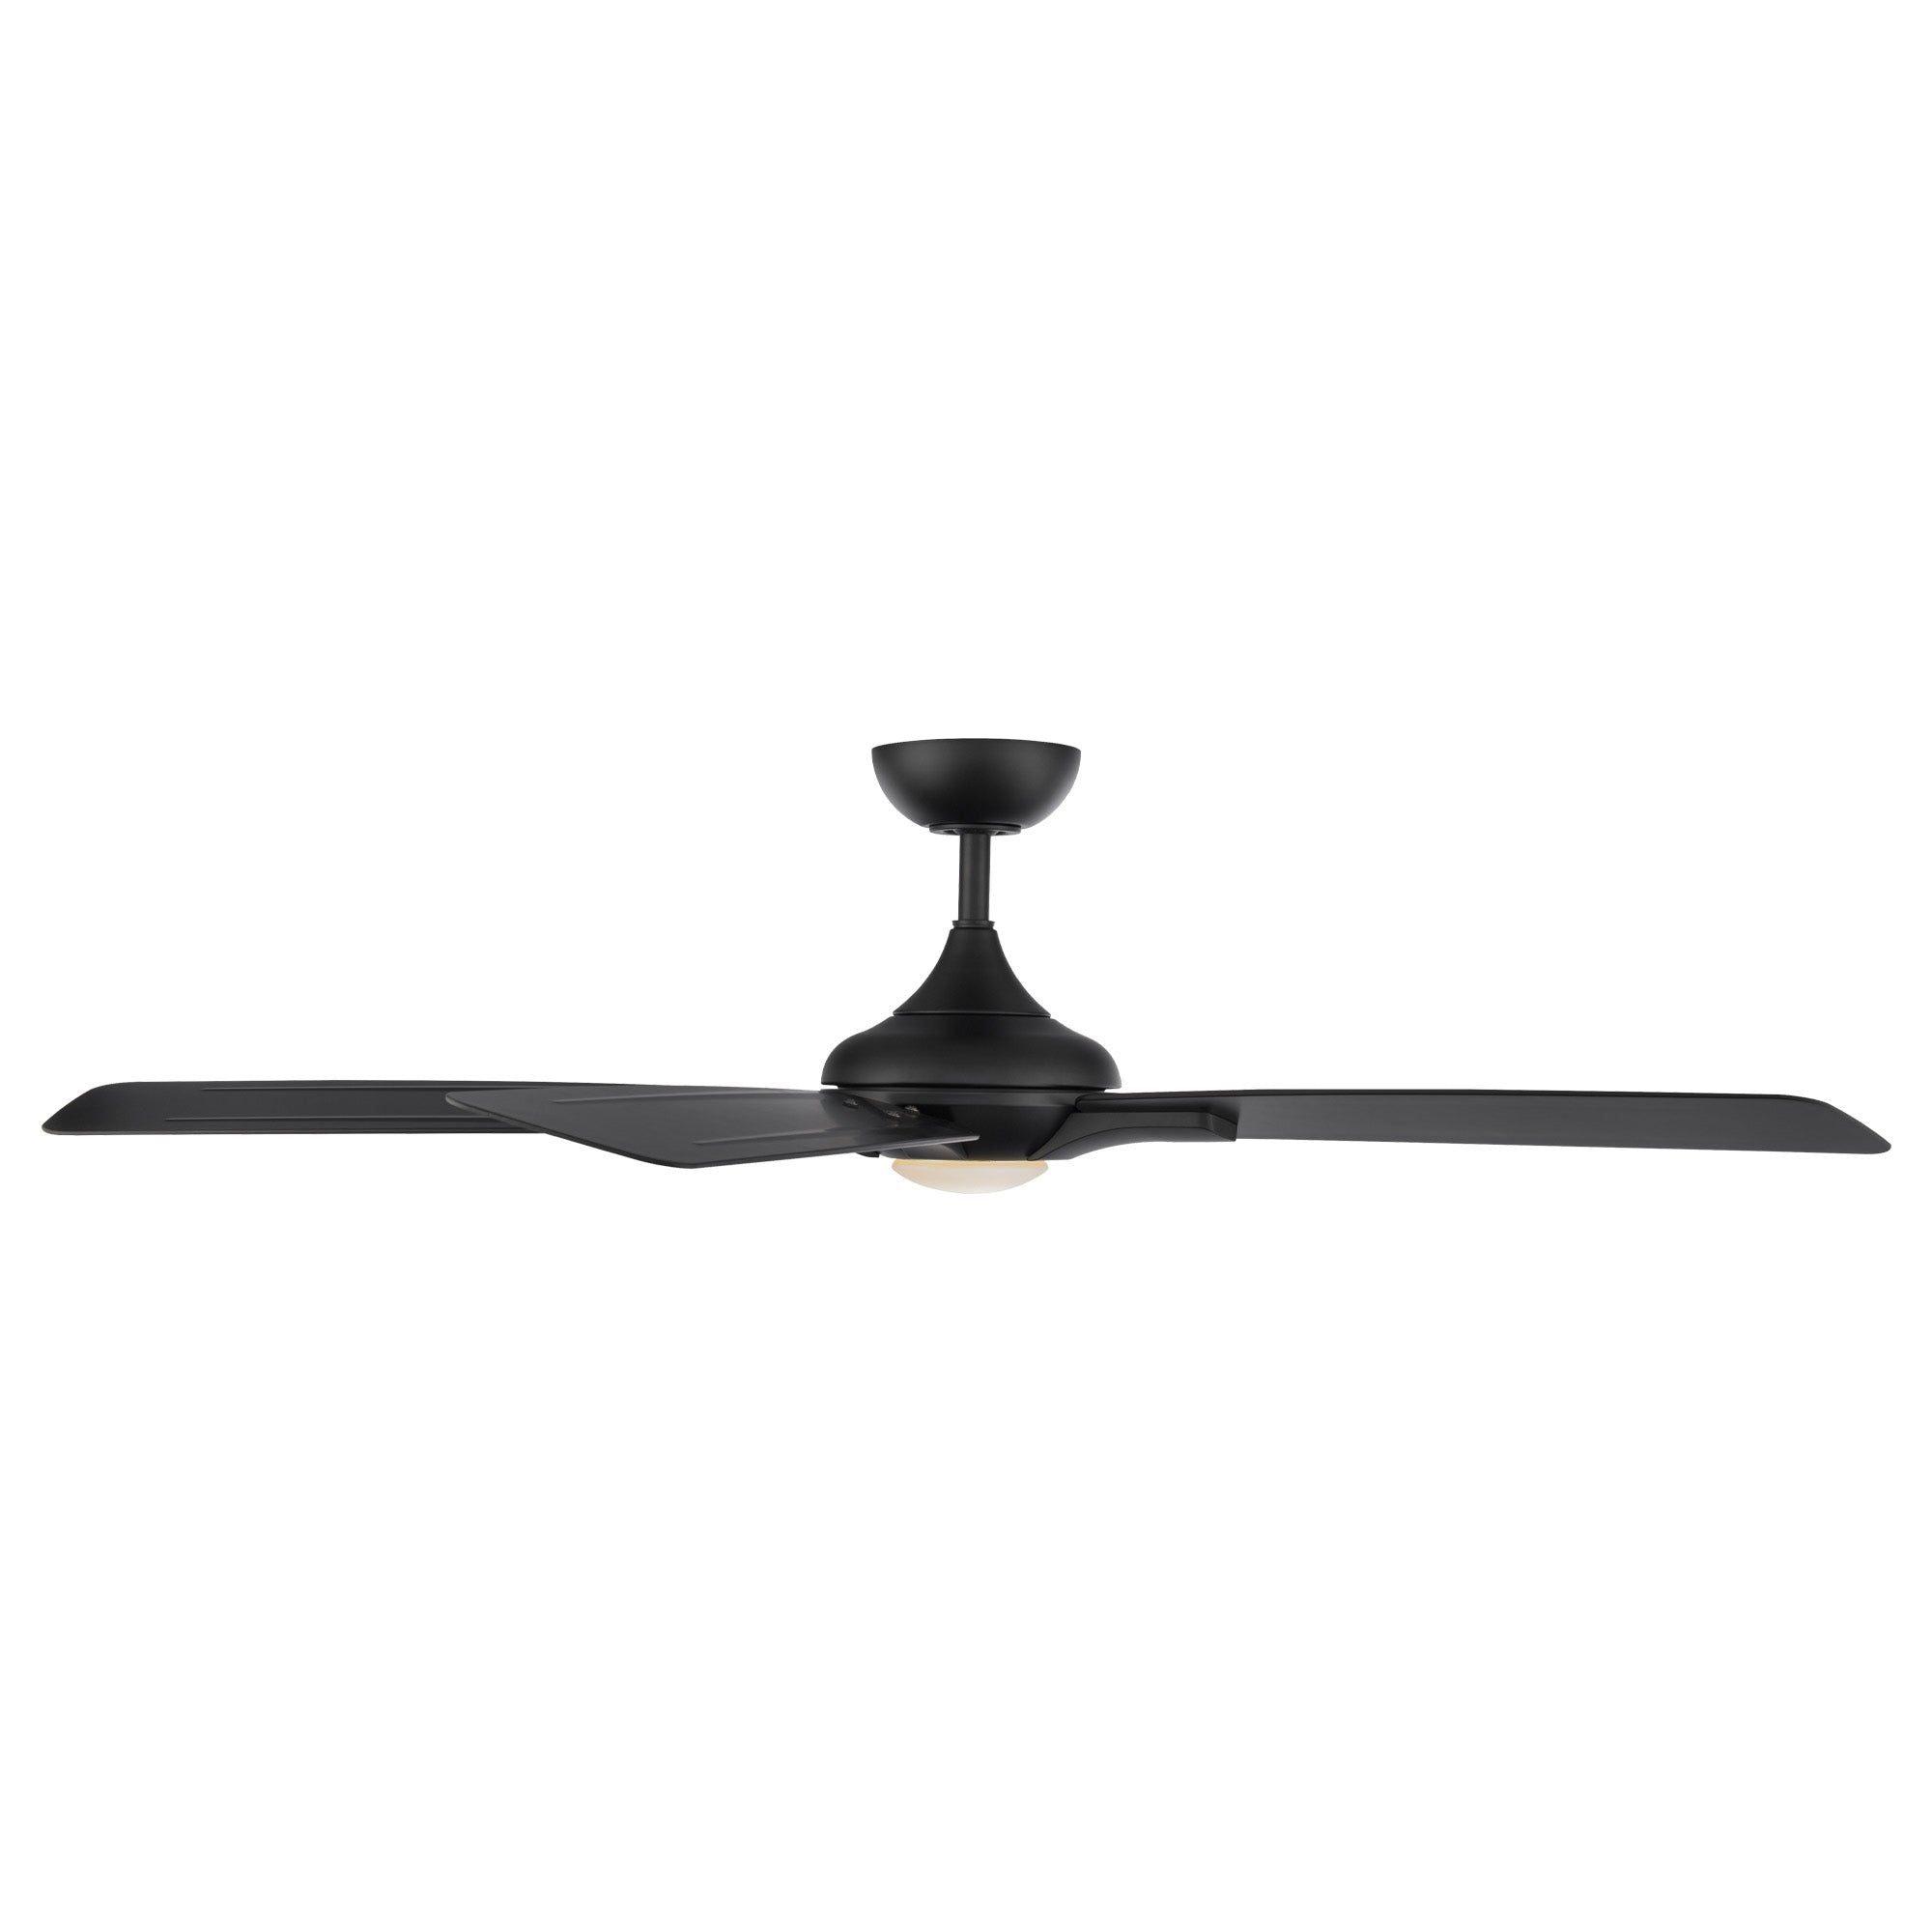 Modern Forms - Mykonos 5 Indoor/Outdoor 5-Blade 60" Smart Ceiling Fan with LED Light Kit and Remote Control - Lights Canada